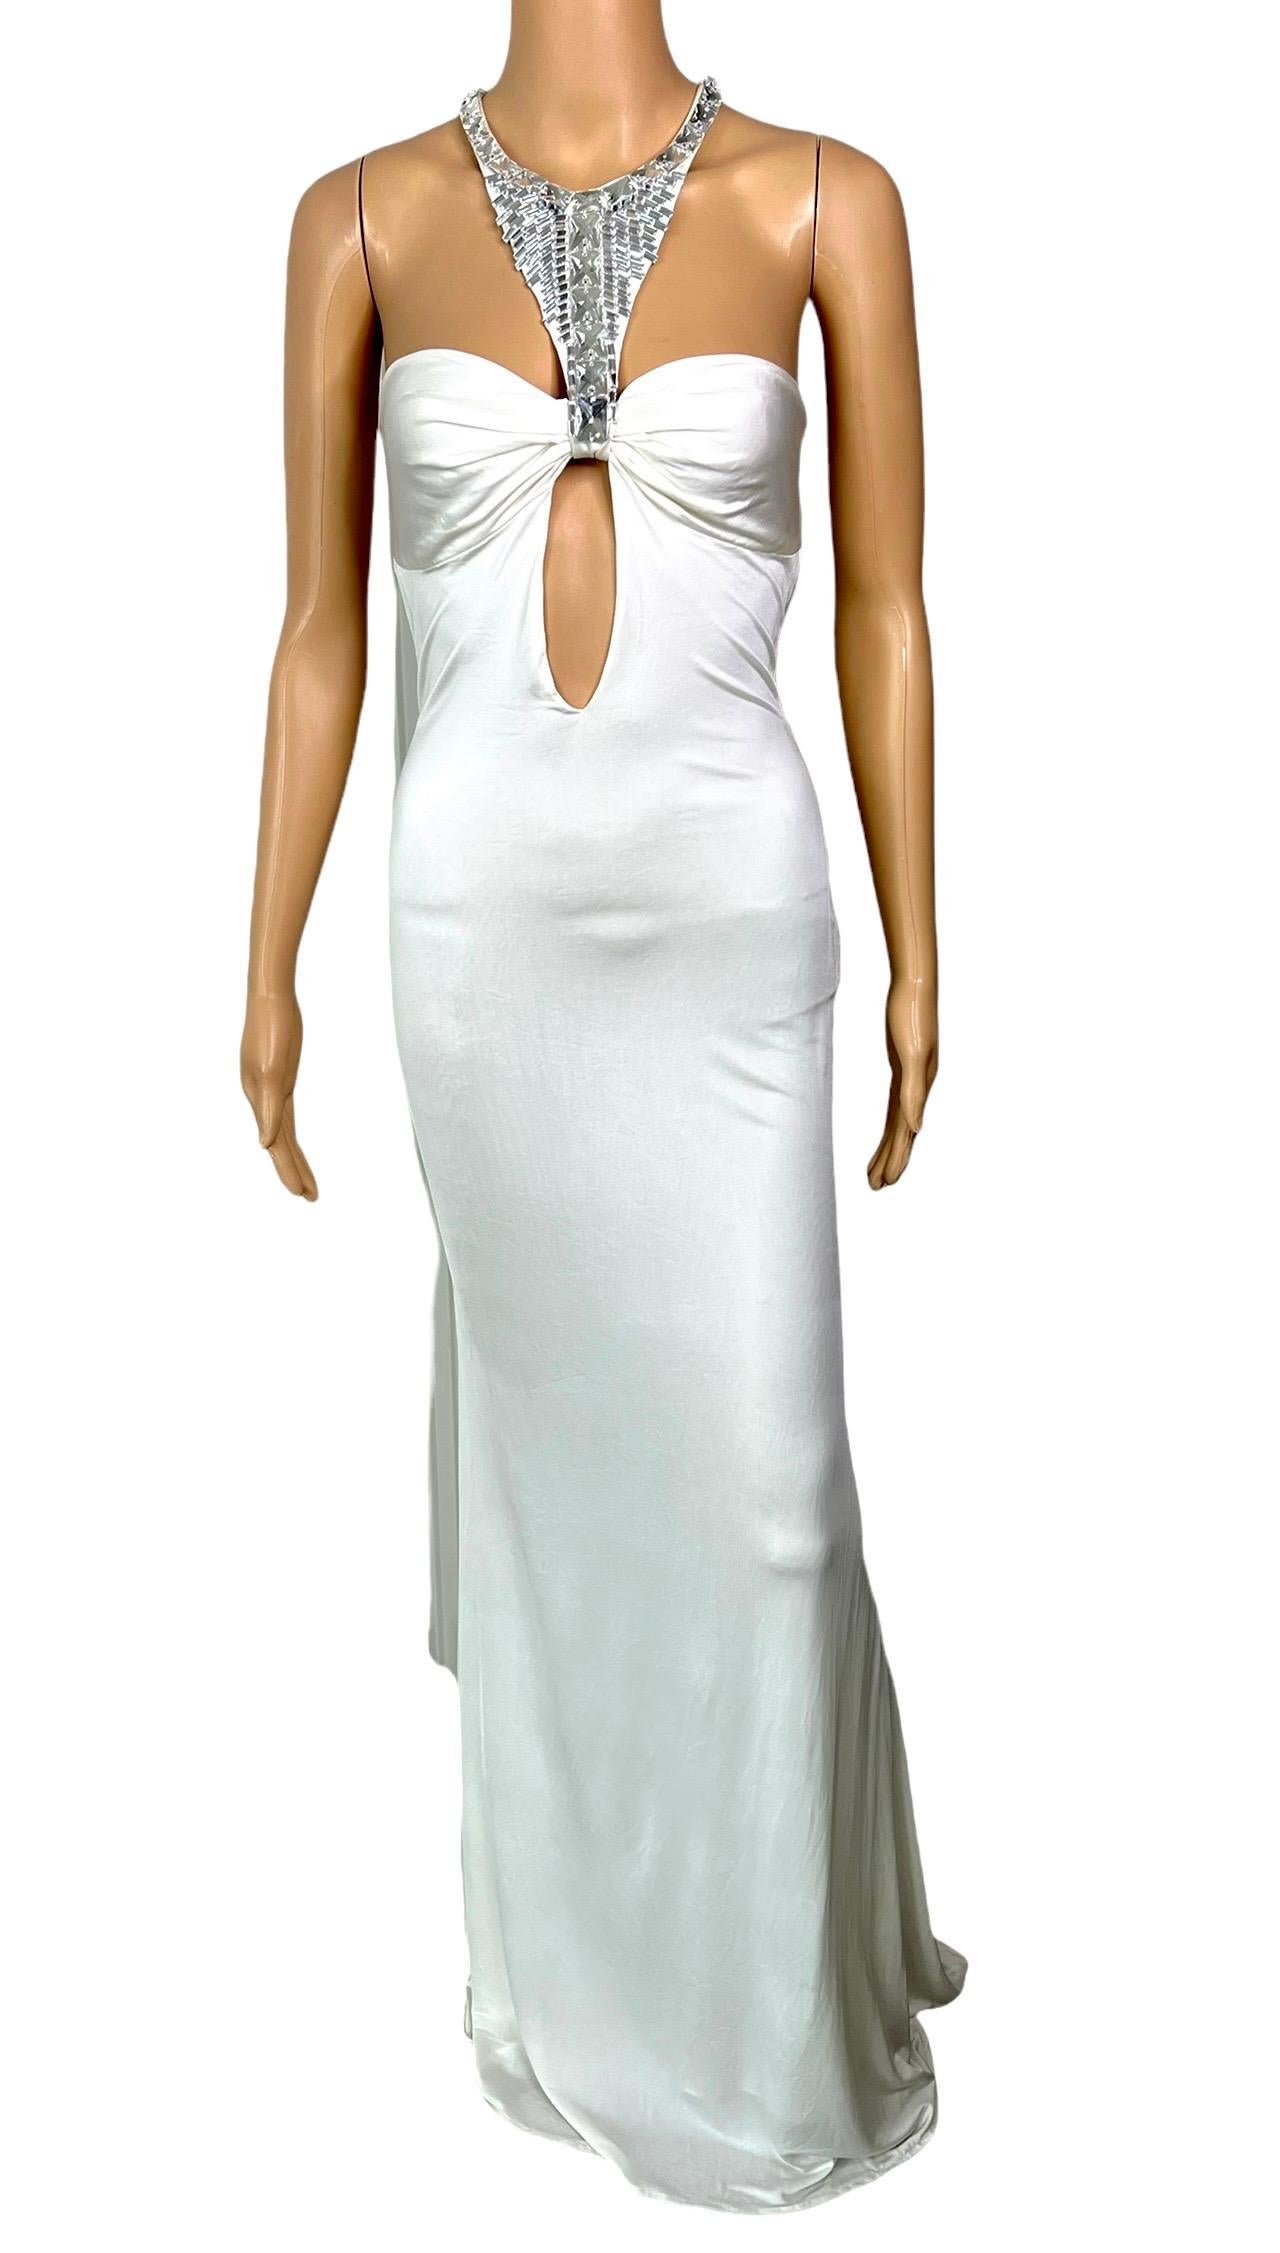 Tom Ford for Gucci F/W 2004 Embellished Plunging Cutout Ivory Evening Dress Gown For Sale 3